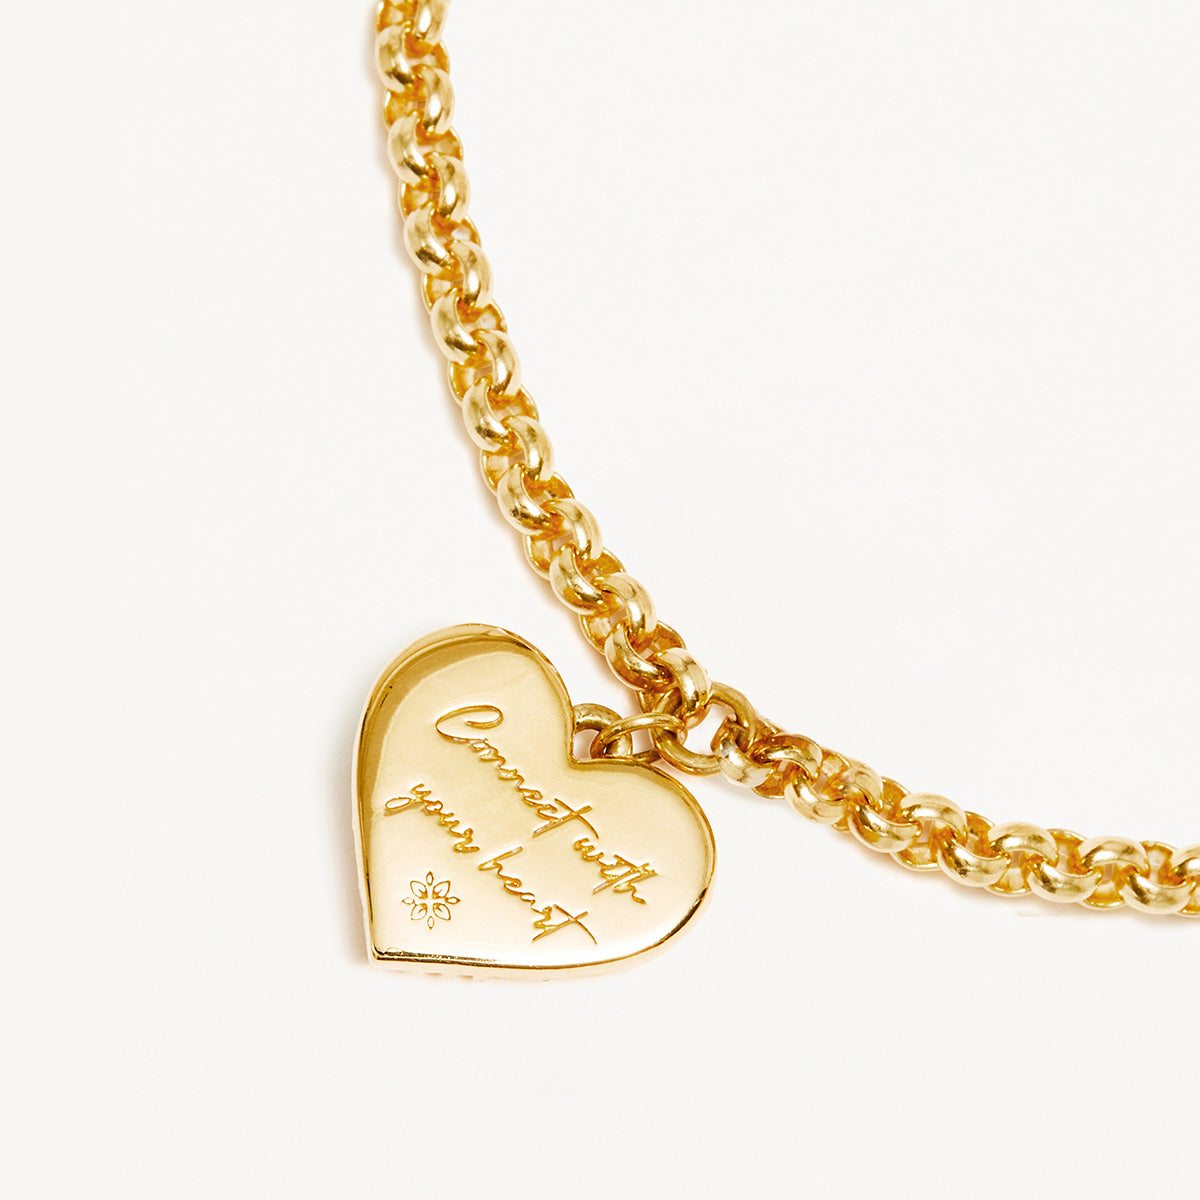 By Charlotte Connect With Your Heart Bracelet, Gold